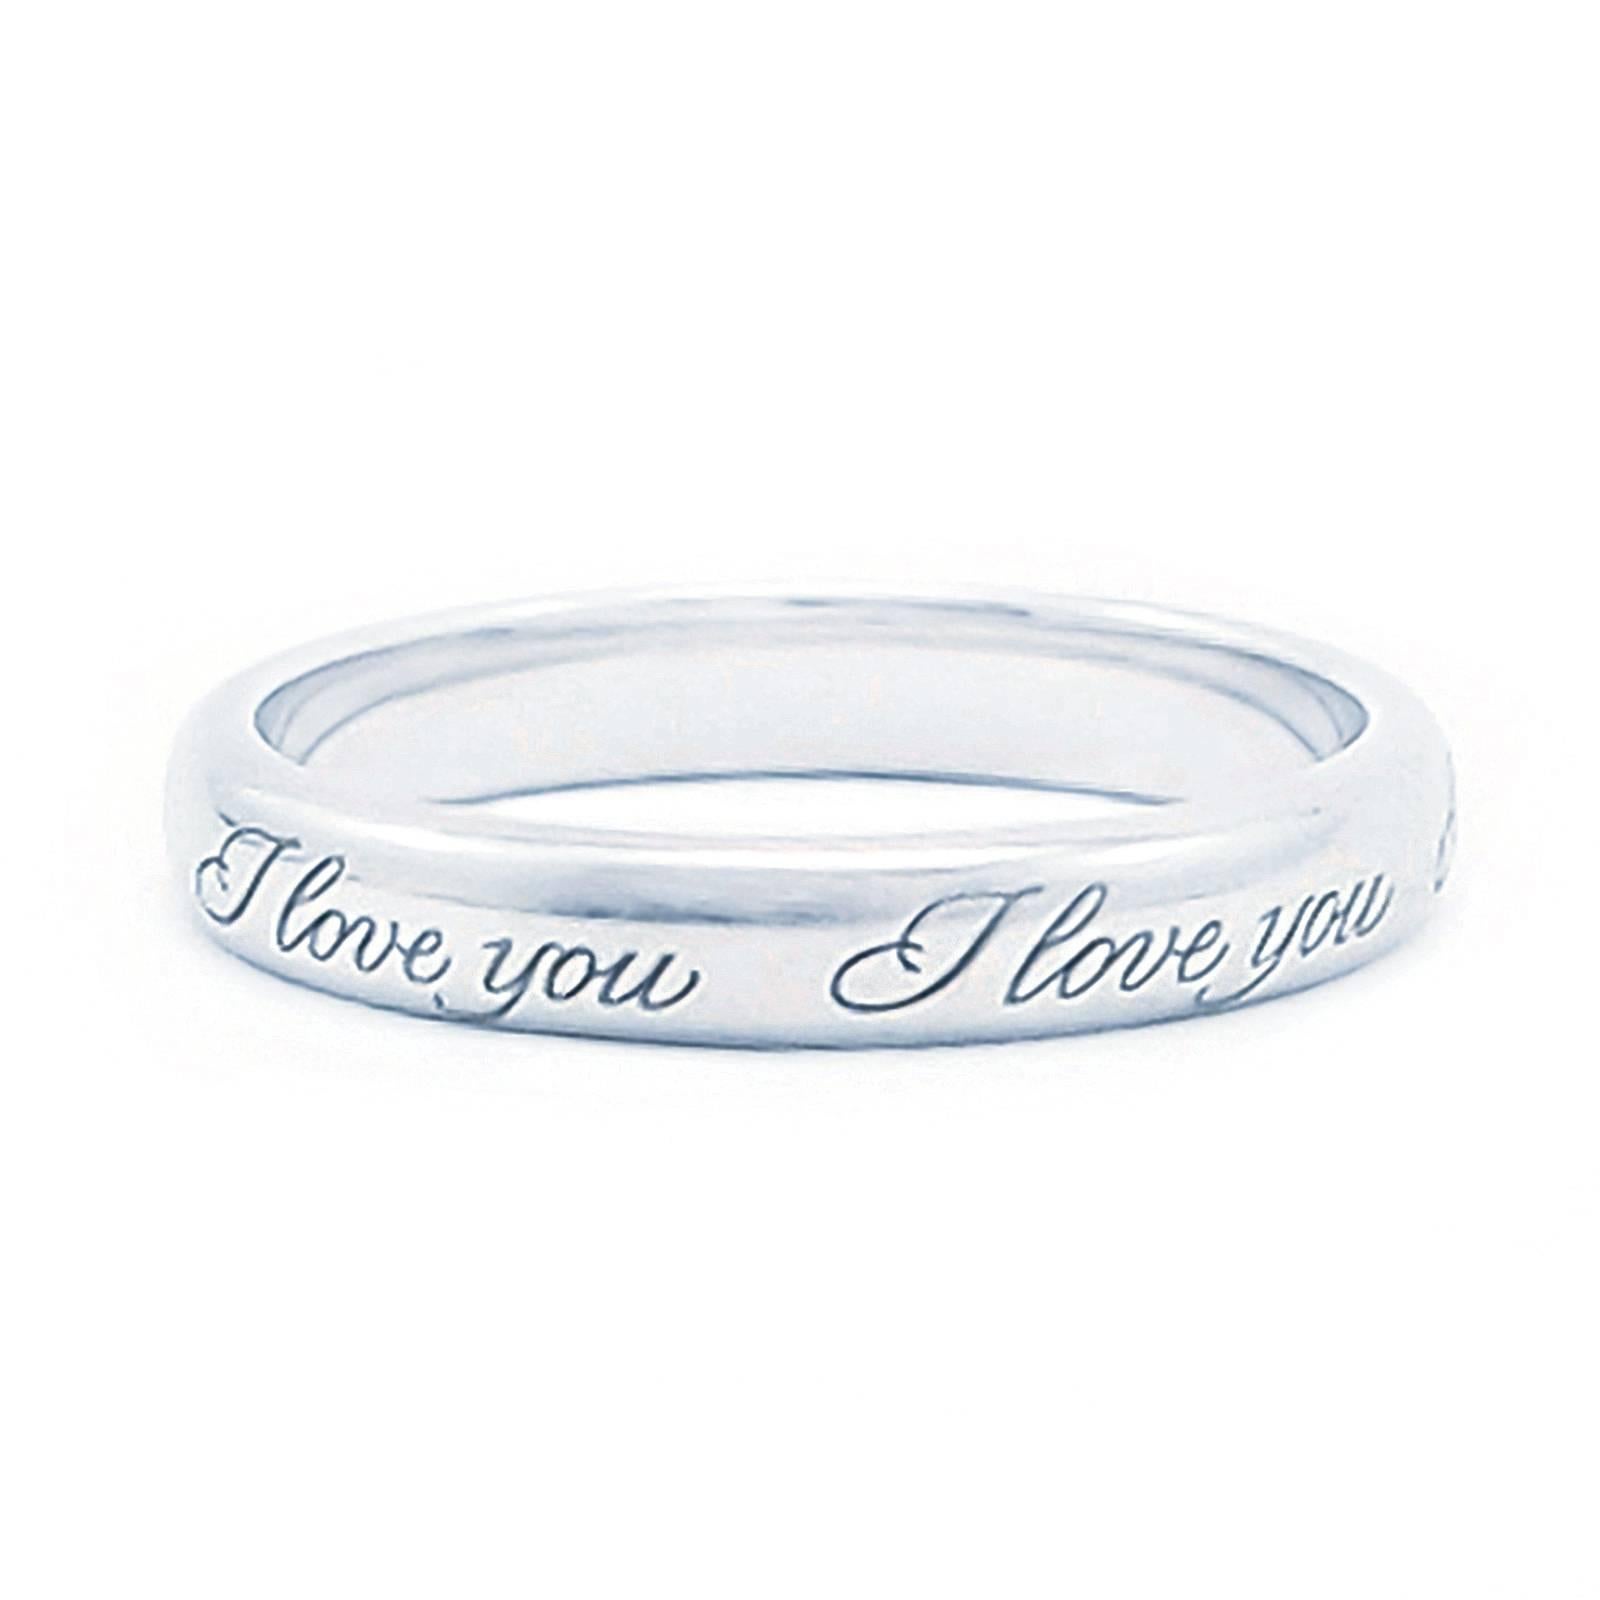 This 3mm Platinum band from the Tiffany Notes collection is softly domed and engraved with the script I Love You repeated around the outside of the ring.  Size 6.

Simple, elegant and understated.

CONDITION: In overall excellent condition with